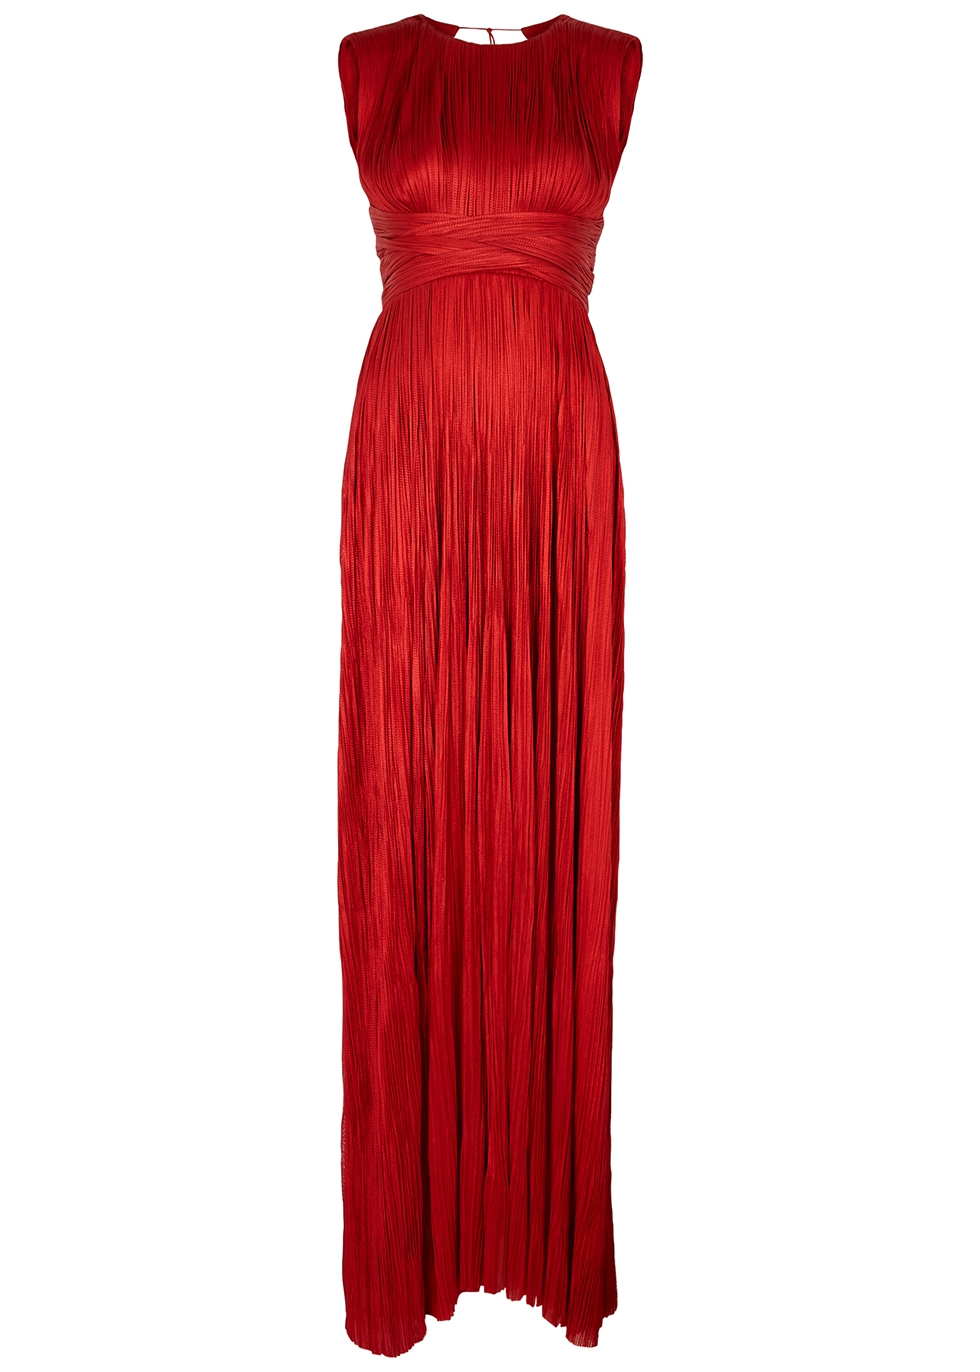 Adela metallic red lace-up silk gown